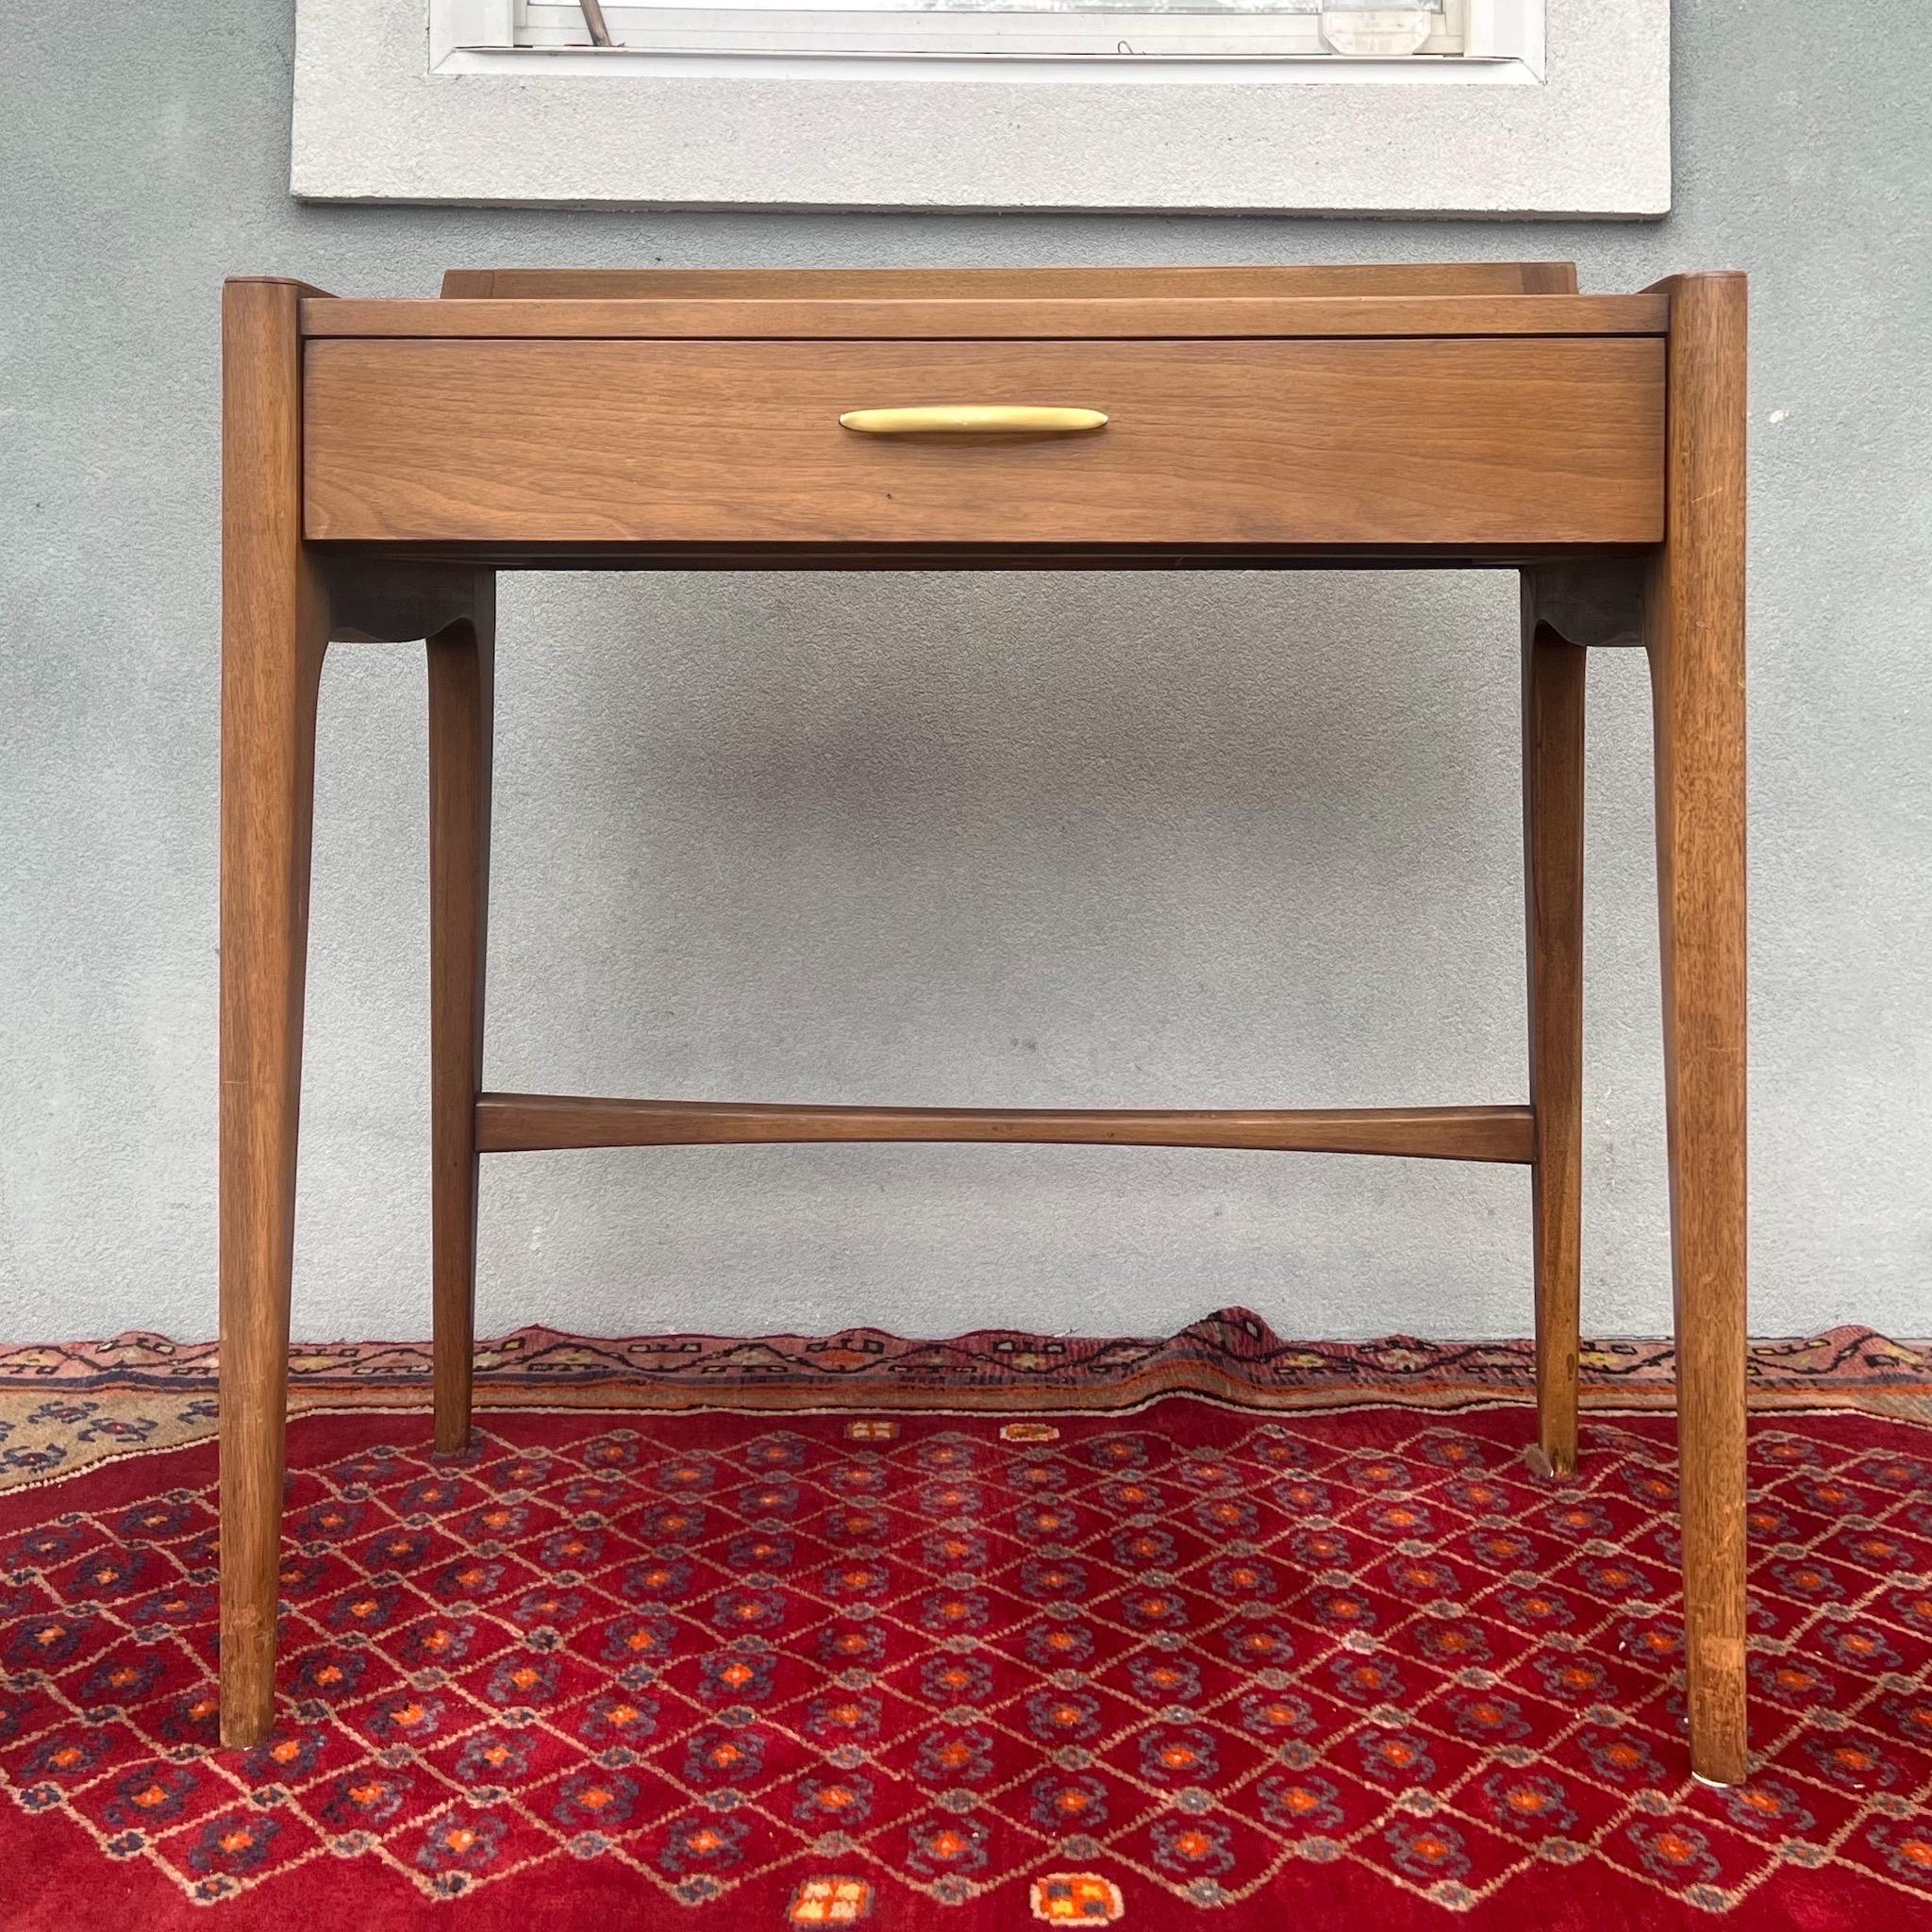 Vintage Mid-Century Modern vanity desk for your consideration. Designed by John Van Koert for Drexel in the 1950's, and part of the Profile series. This vanity/ single drawer writing desk/ console table is rare, and is in its original finish with